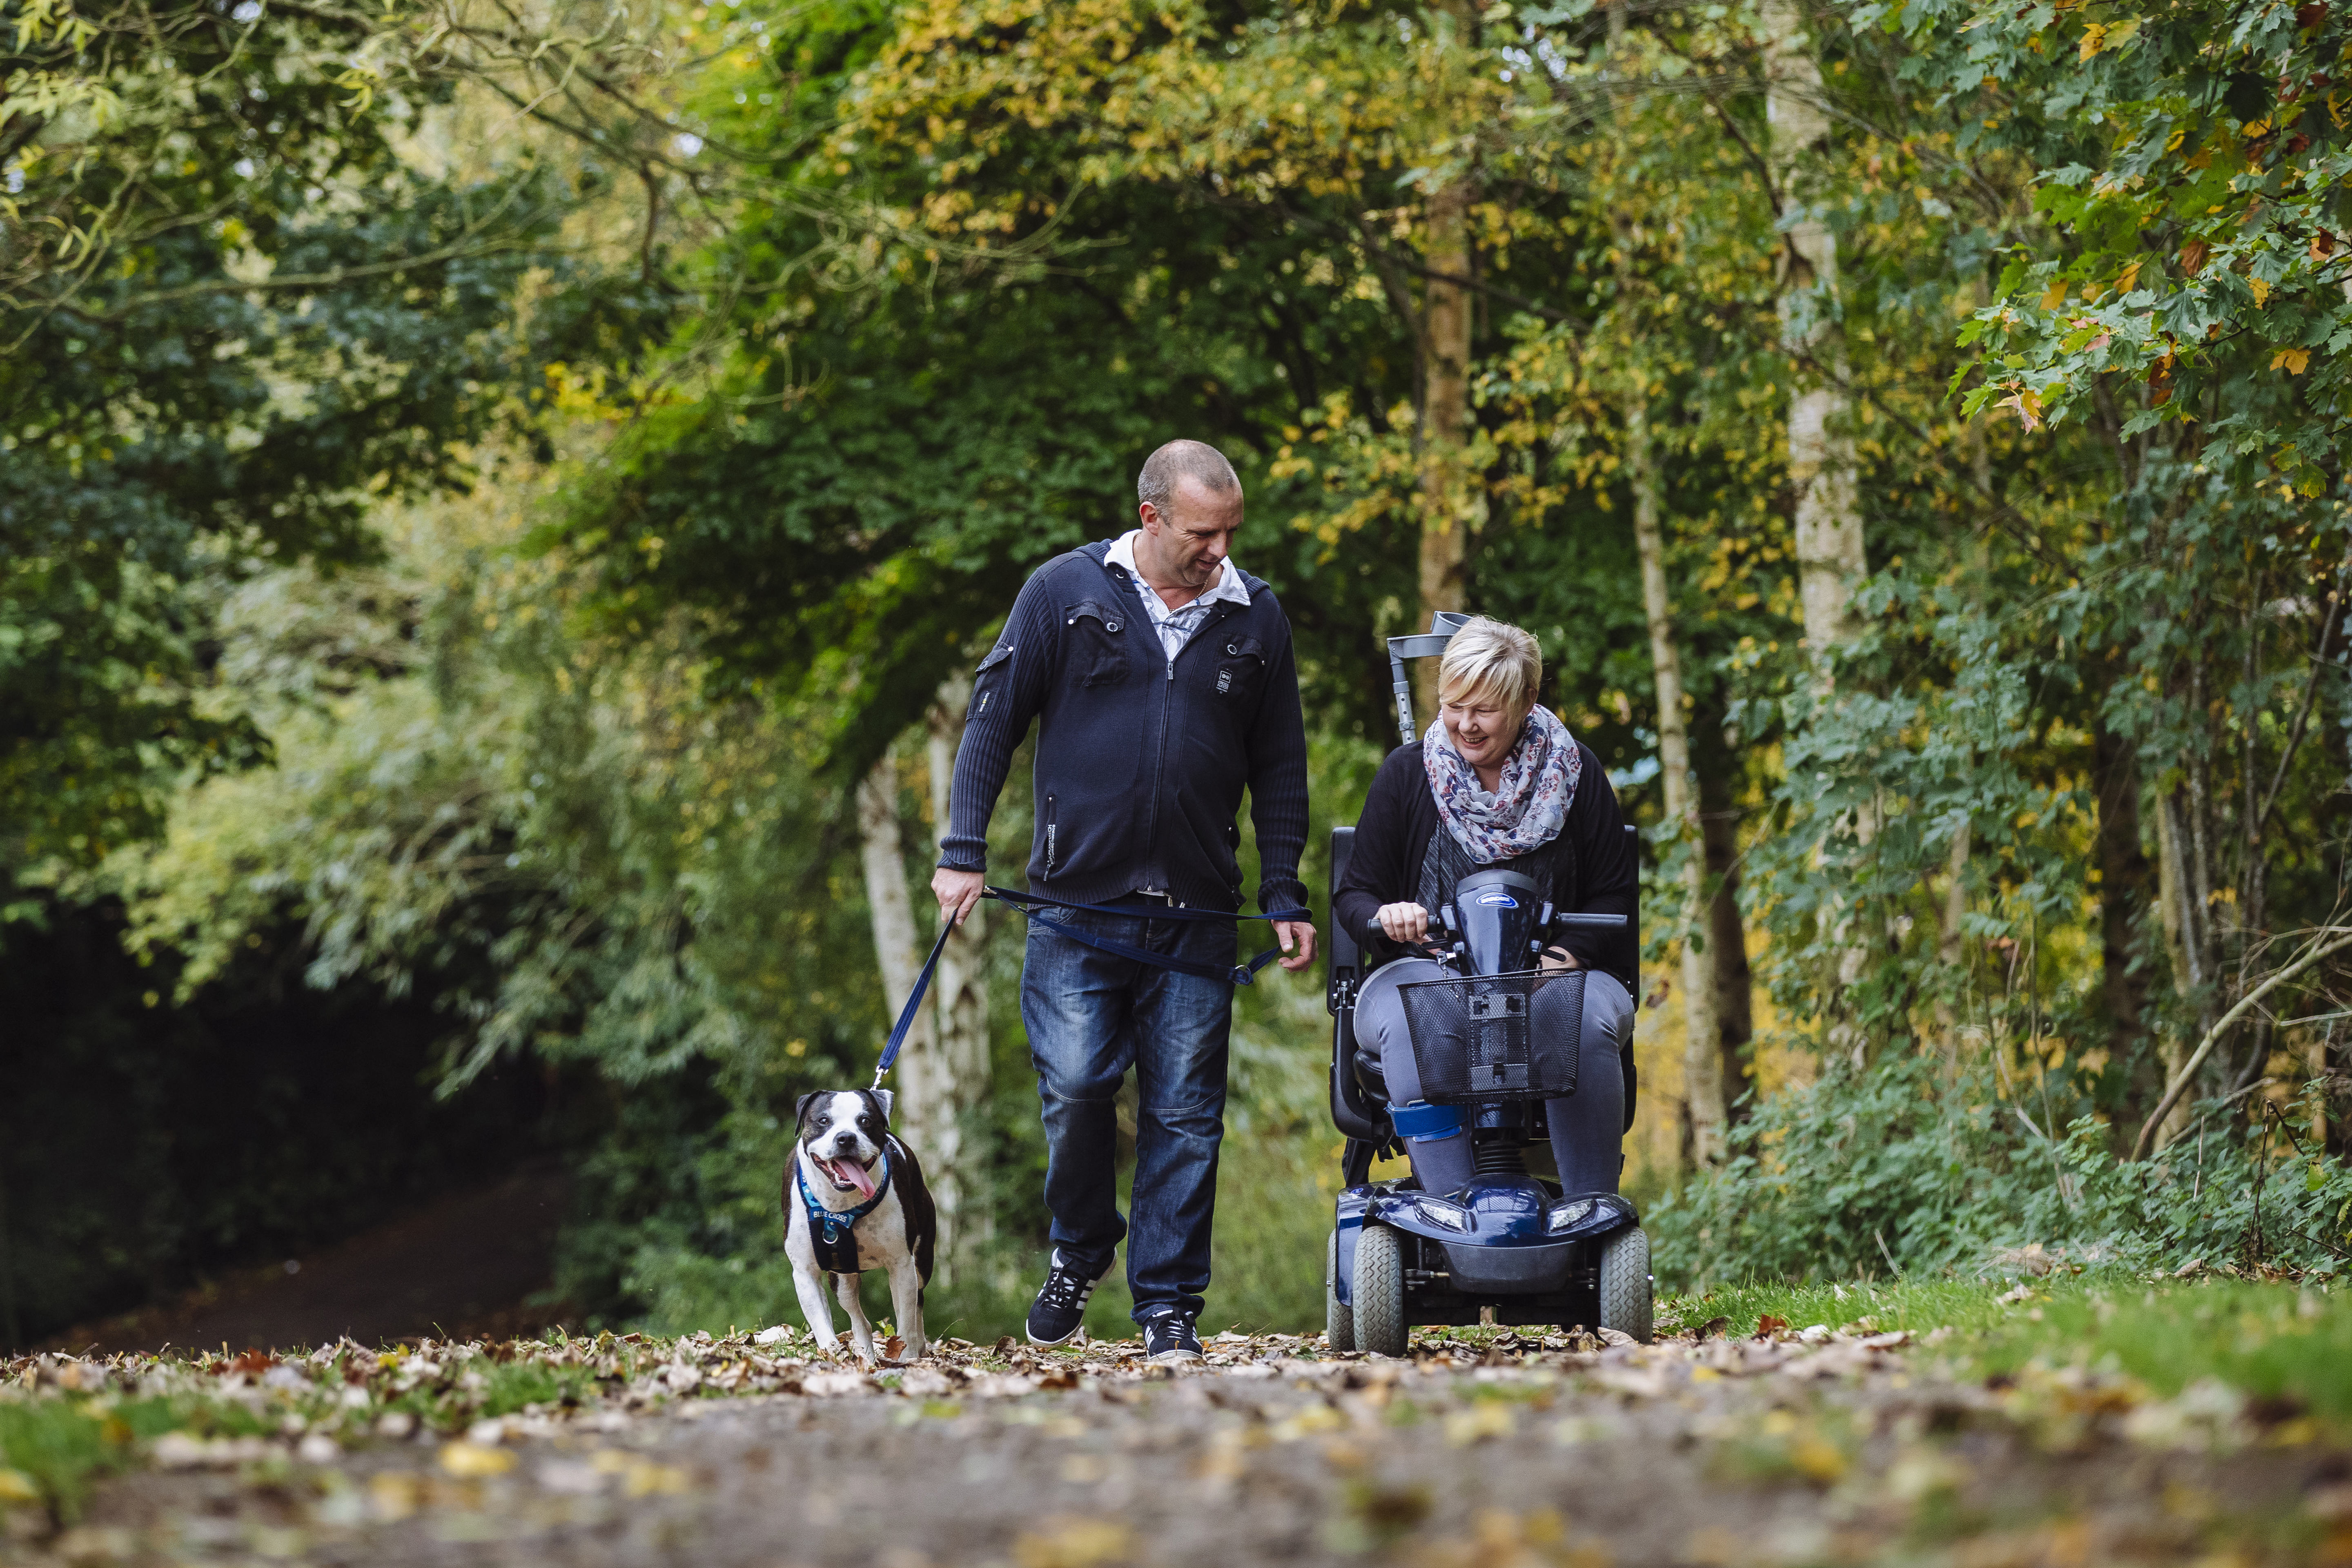 Hunter enjoys a walk with Jeff who is walking and Rachel who is in her mobility scooter